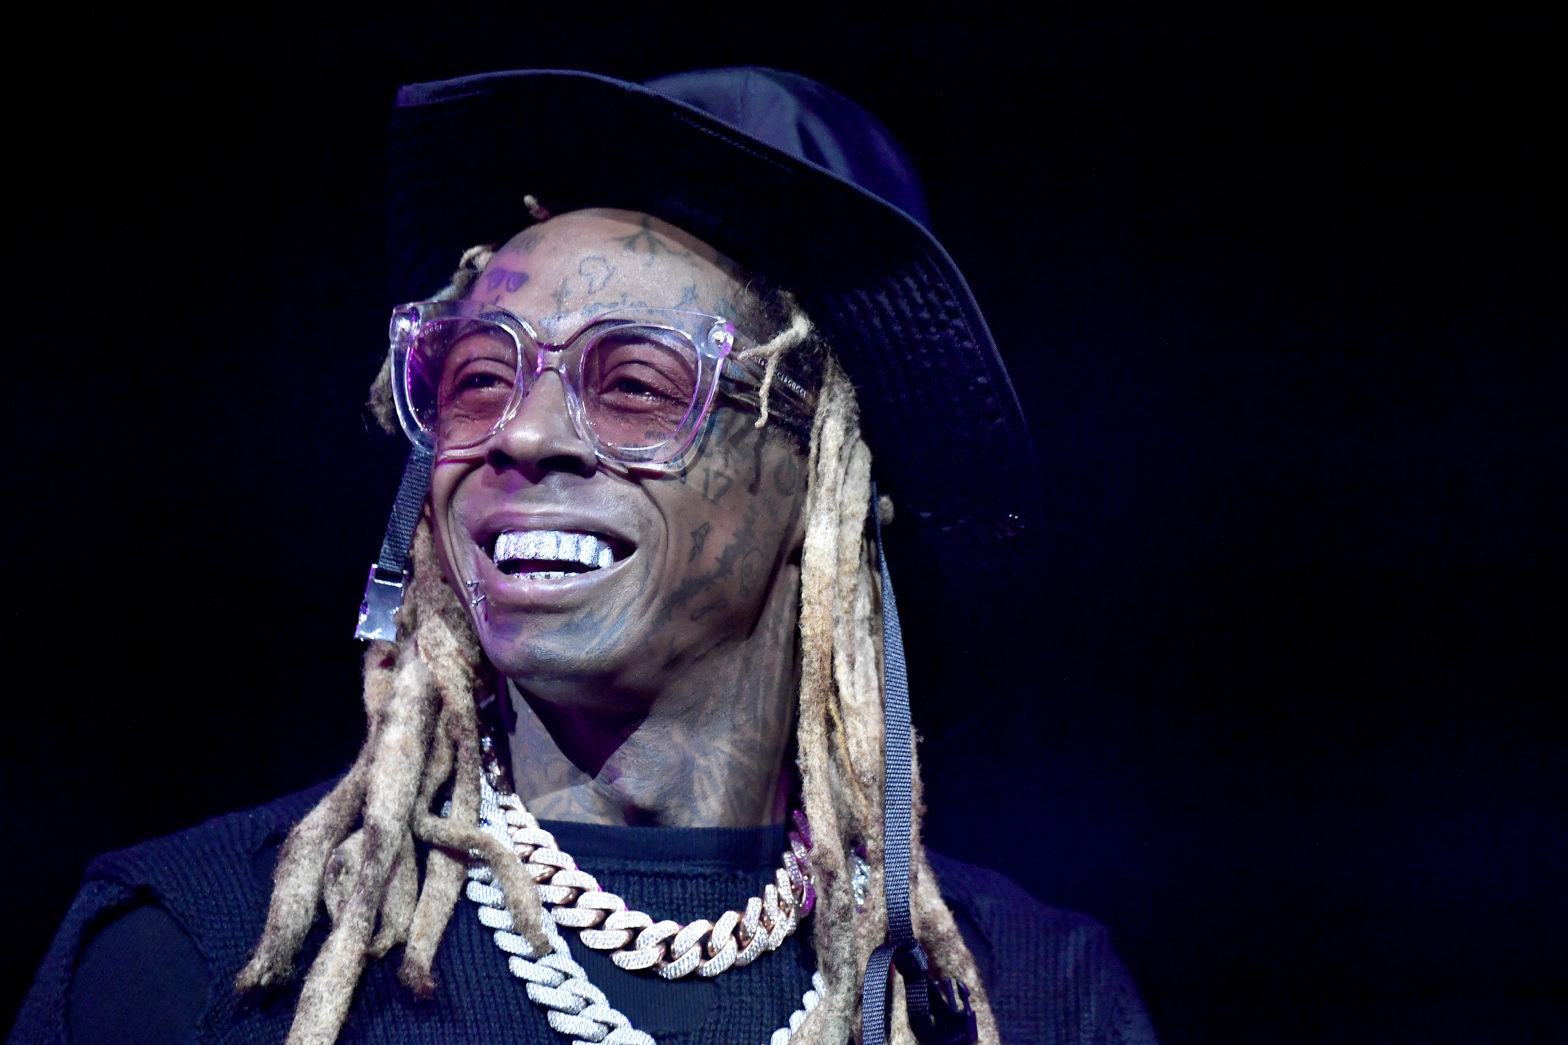 In 2020, The Saudi Royal Prince Gave Lil' Wayne Expensive Gifts For His Airport Trouble